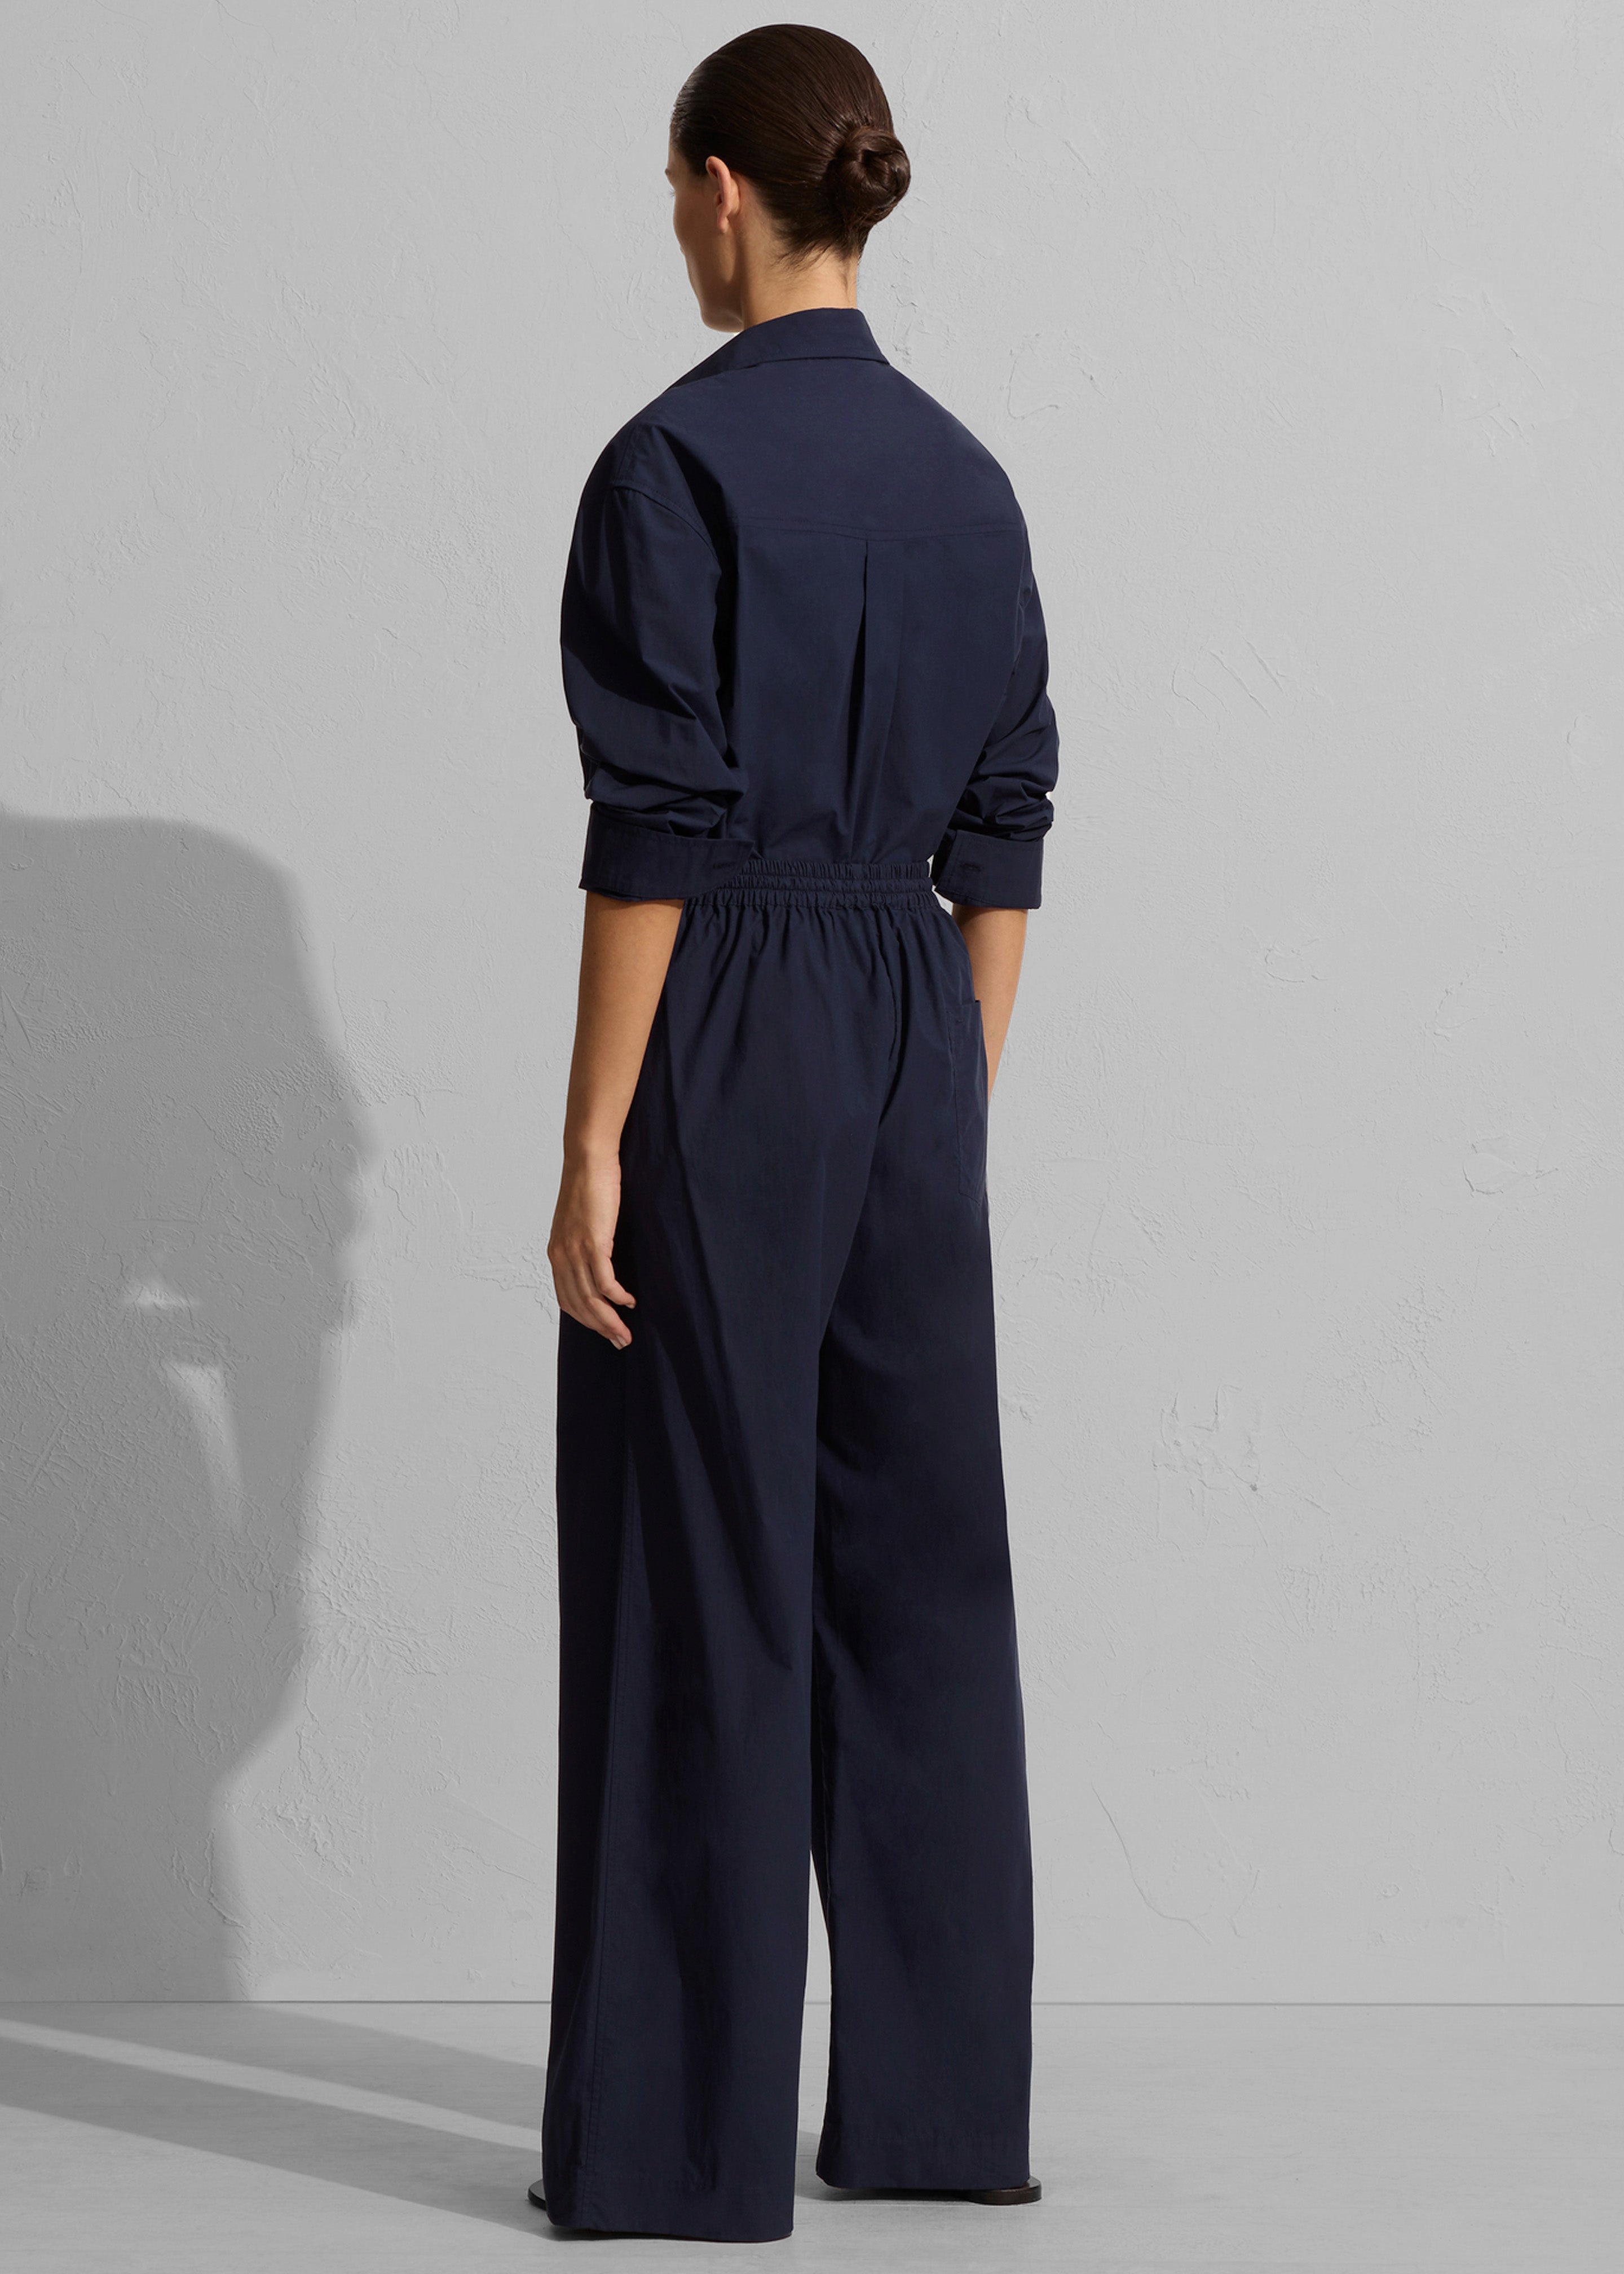 Matteau Relaxed Pant - Navy - 5